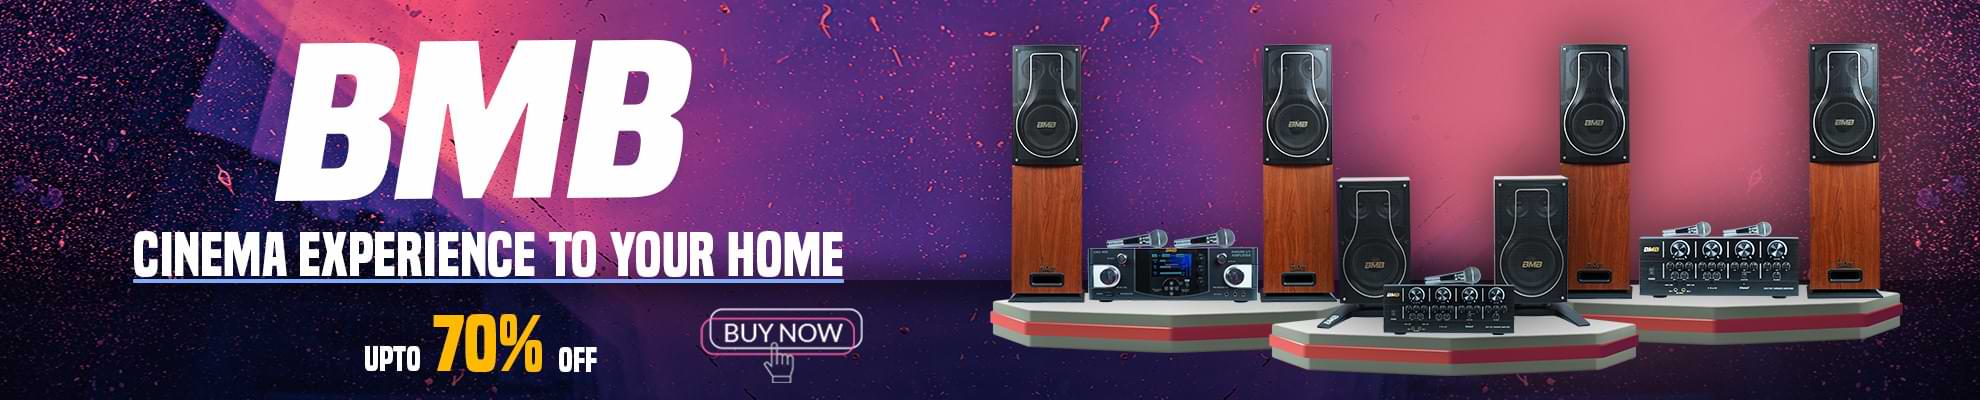 bmb home theater system - Cinema Experience to your Home